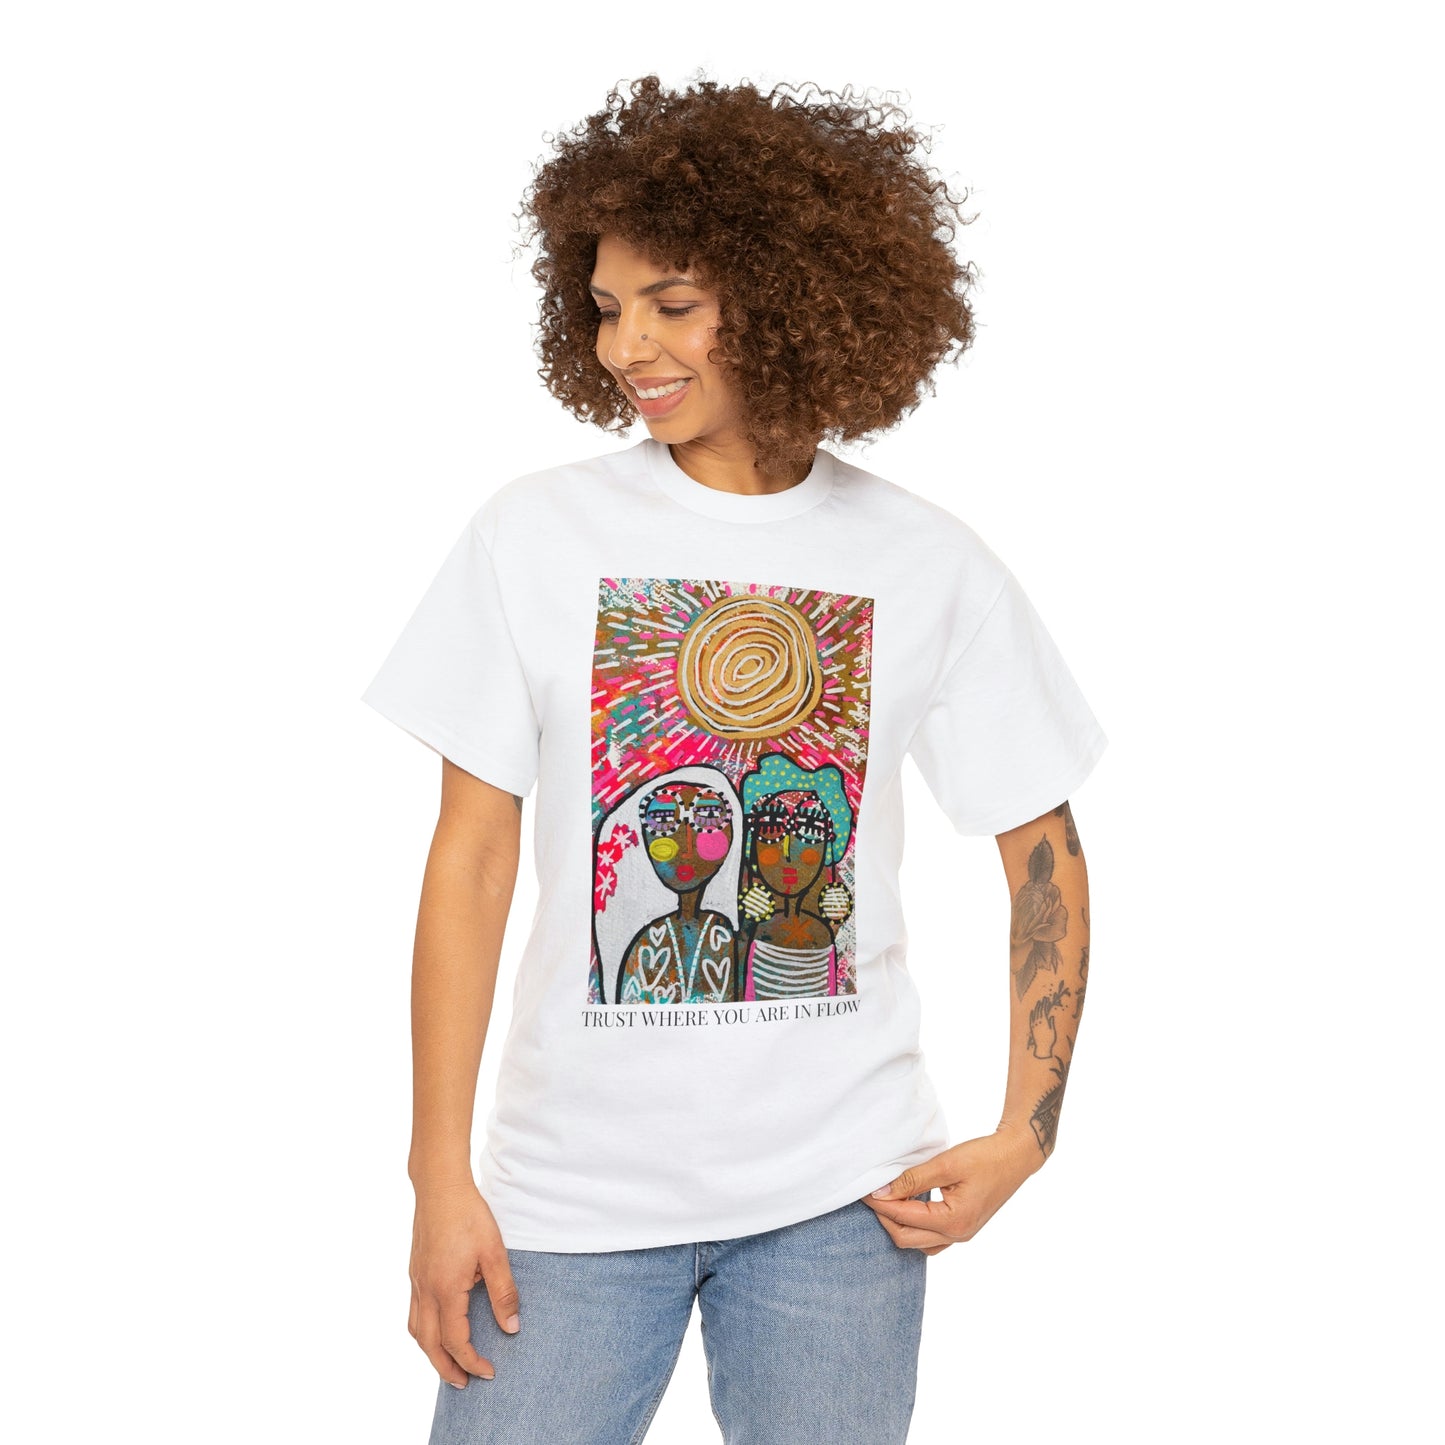 "TRUST WHERE YOU ARE IN FLOW" Unisex Heavy Cotton Tee